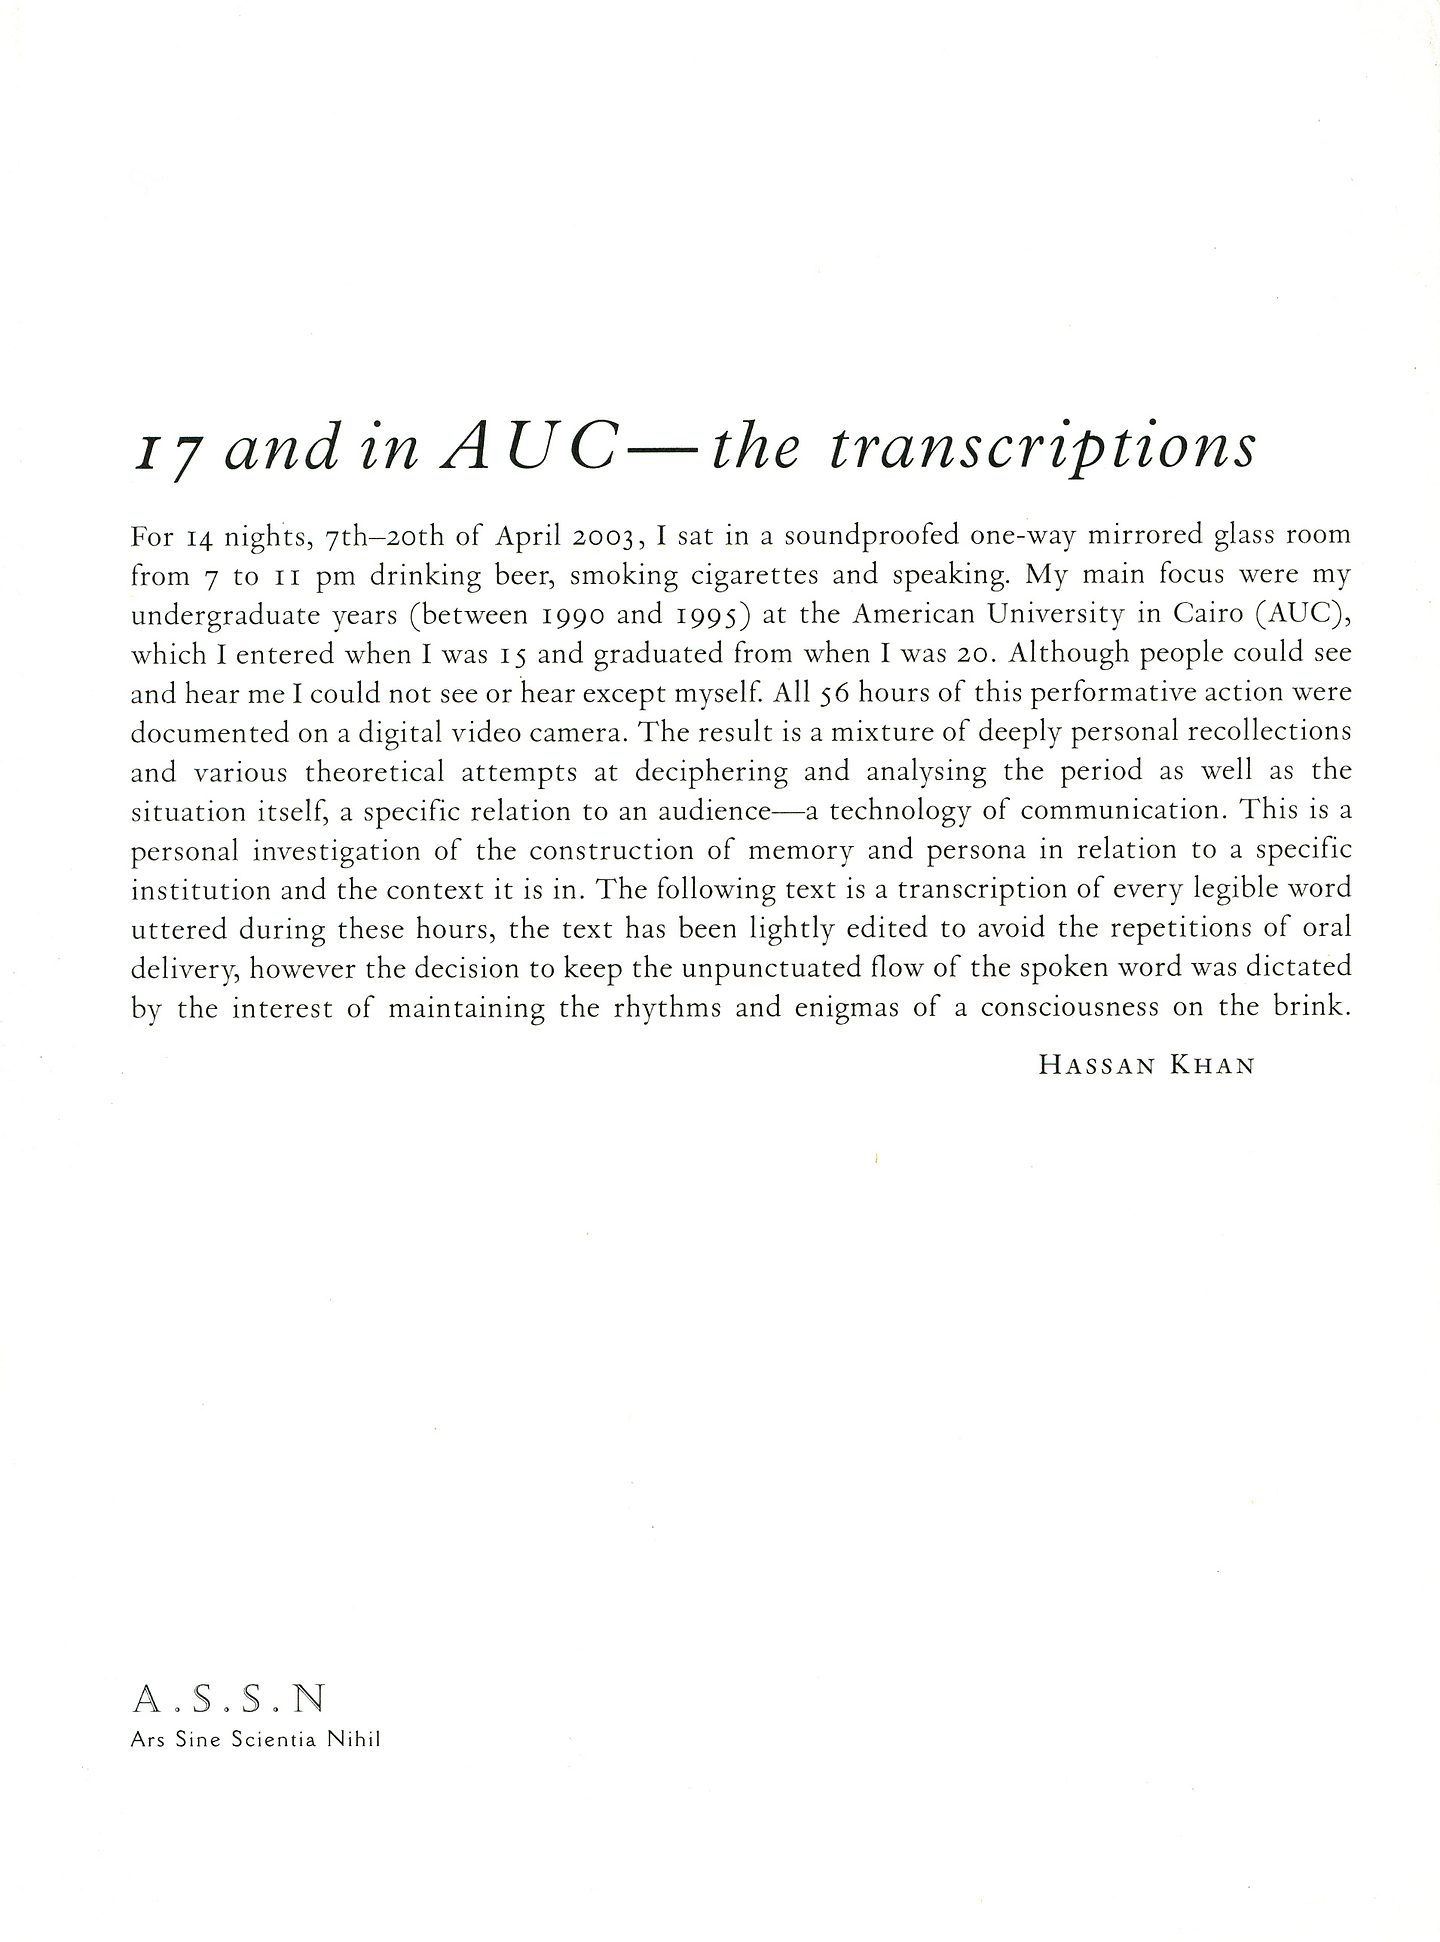 17 and in AUC – The transcriptions